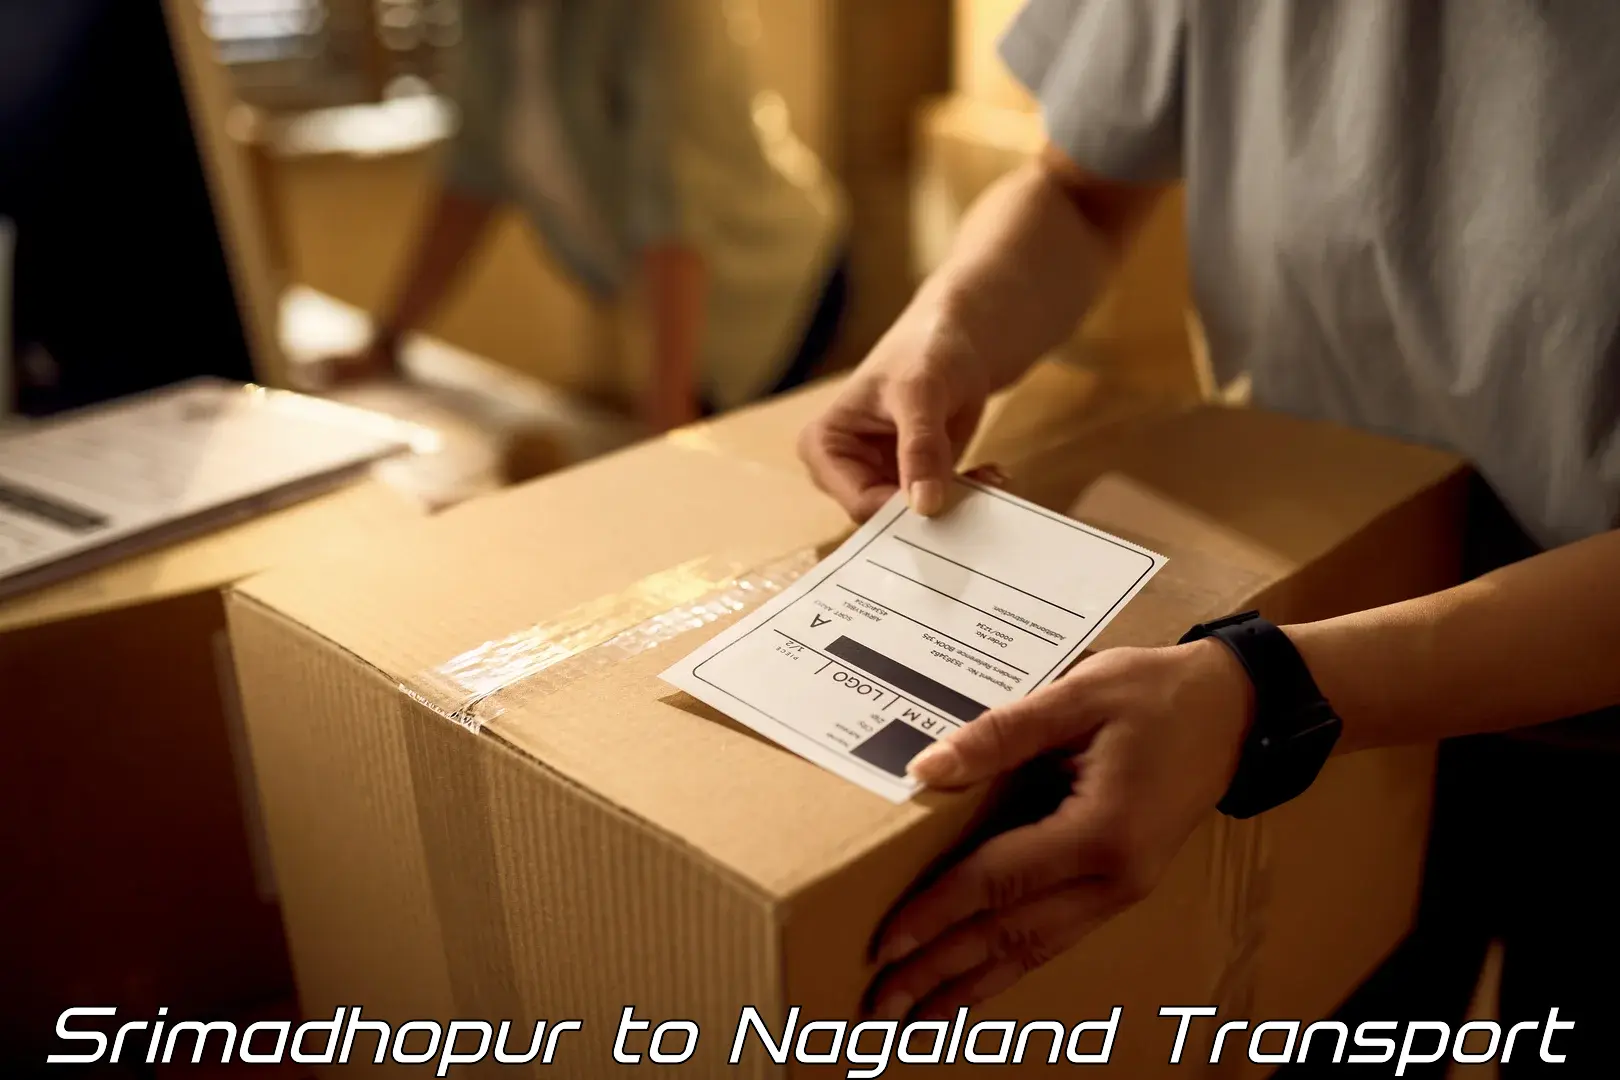 Transport in sharing in Srimadhopur to Nagaland